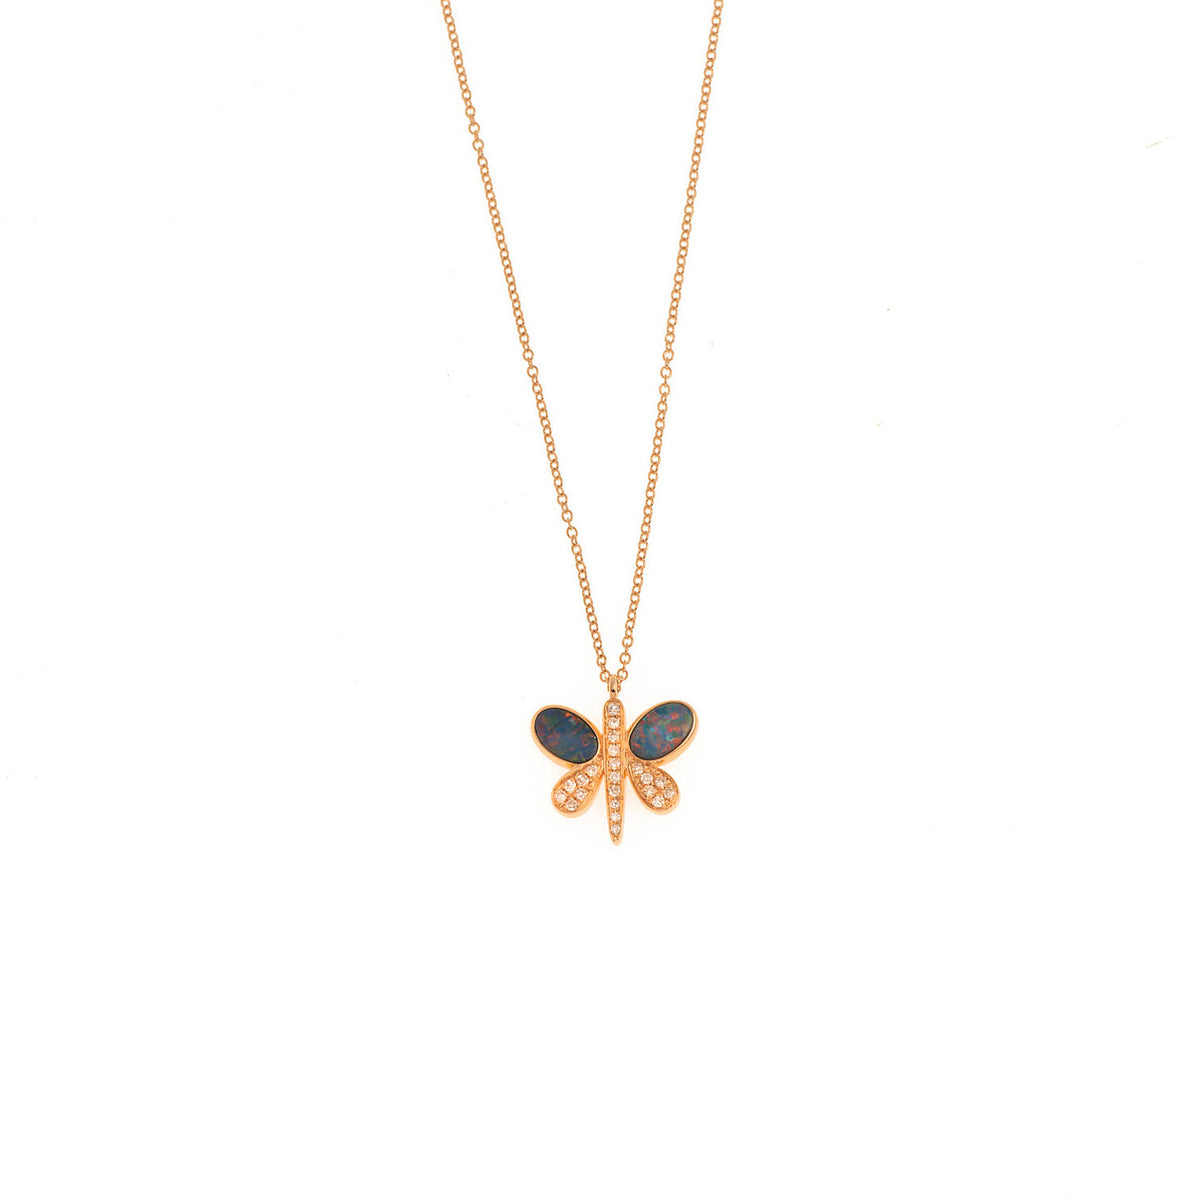 Symbol necklace. Heart, butterfly, round necklace. Gift necklace. Coral necklace. Precious stone necklace. Evil Eye necklace. Chain necklace. Easy to wear necklace. Anatol jewelry. Fine jewelry. Golden Hall. Kifissia. Athens. Χρυσό κολιέ. Κολιέ με διαμάντια. Χρυσά κοσμήματα. Κηφισιά. Κολιέ με μπριγιάν.